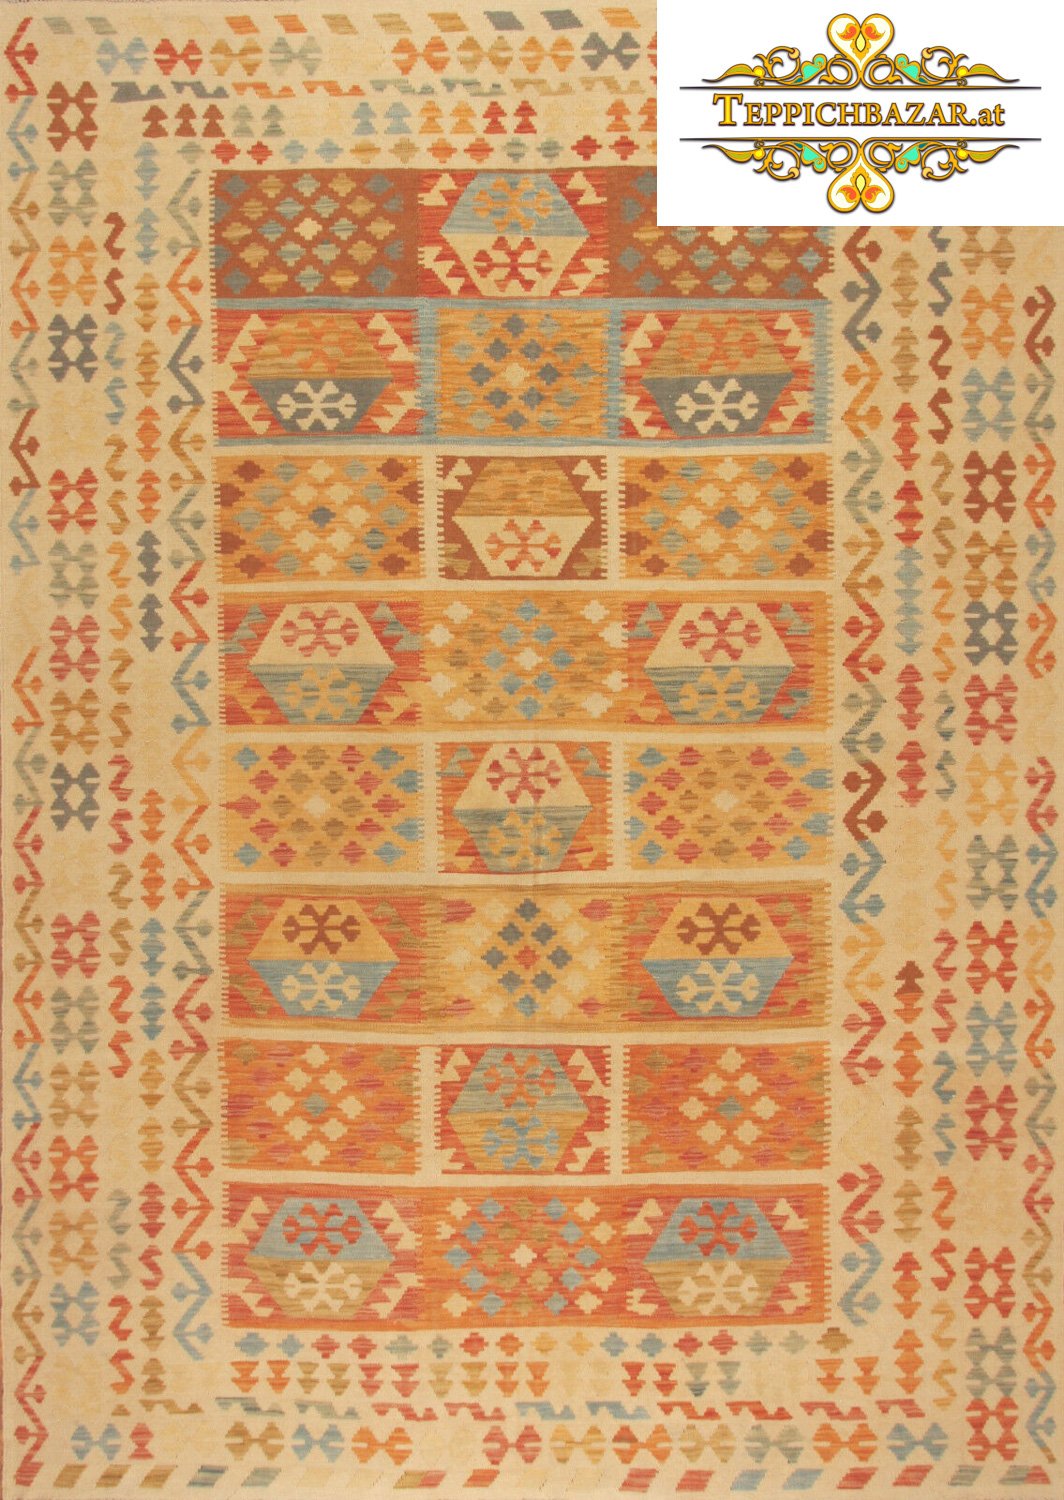 (#H1169) APPROX. 345X240CM HAND KNOTTED AFGHANISTAN AFGHANKELIM AFGHANKELIM,AFGHANISTAN,WOOL,ORIENTAL RUG,CARPET BAZAR,CARPET,RUGS,PATTERNS,BRICKLER,ORIENTAL CARPETS TYPE: AFGHANKELIM WITH SIGNATURE ORIGIN: AFGHANISTAN FLOOR: 100% WOOL WITH NO ADDITIVES NECKLACE: 100% COTTON SIZE: 345X240CM DOUBLE SIDE CONDITION: VERY GOOD, IN TOP CONDITION PERSIAN CARPET ORIENTAL CARPET